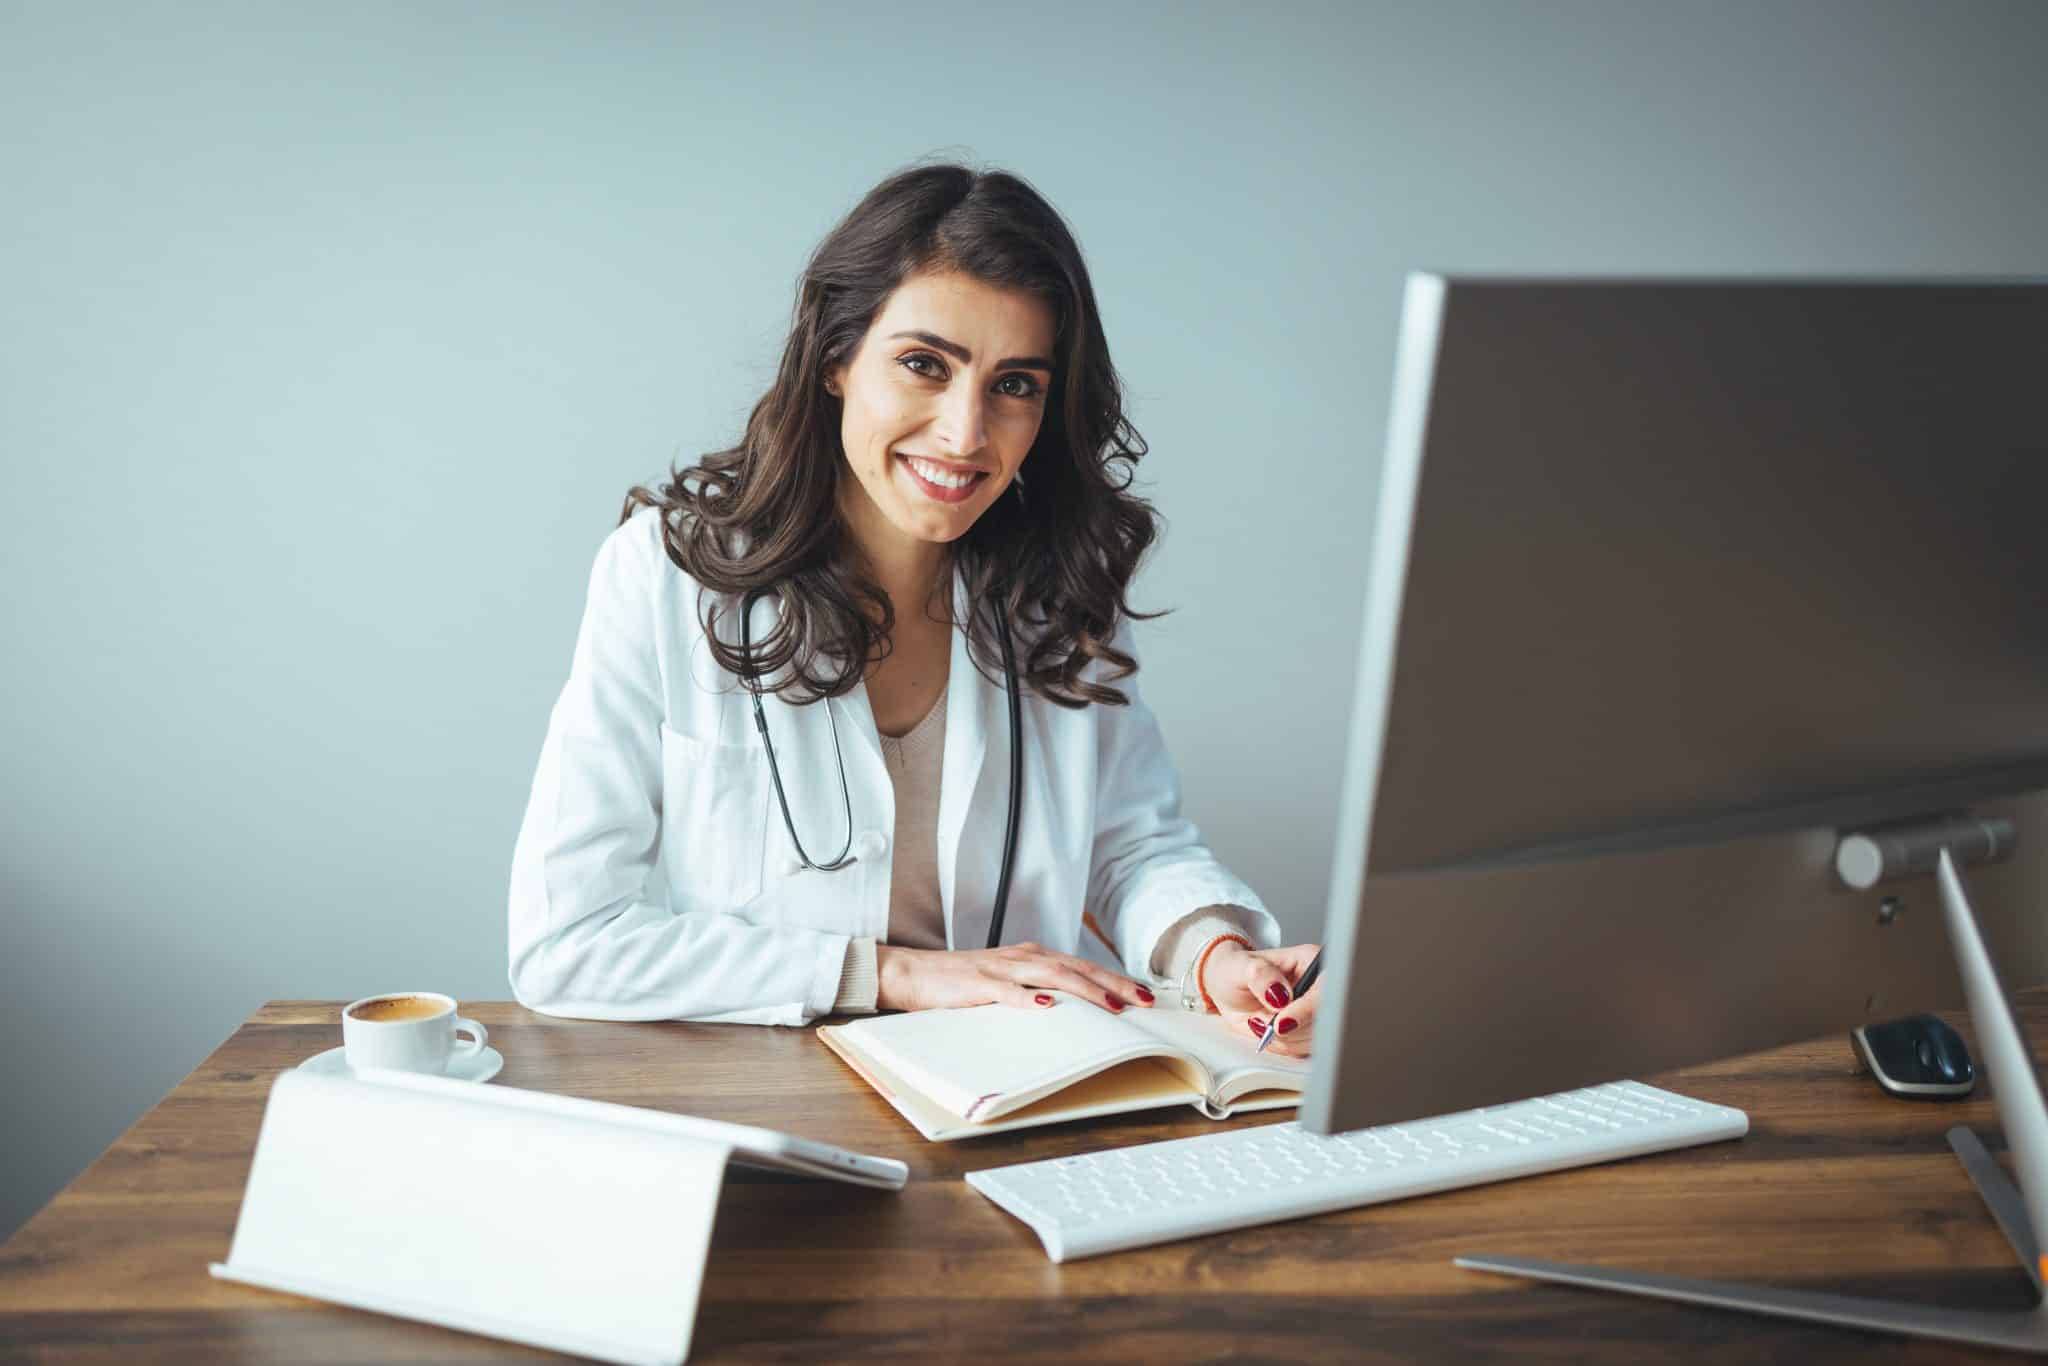 weight loss clinic physician using the computer to learn how to attract more patients